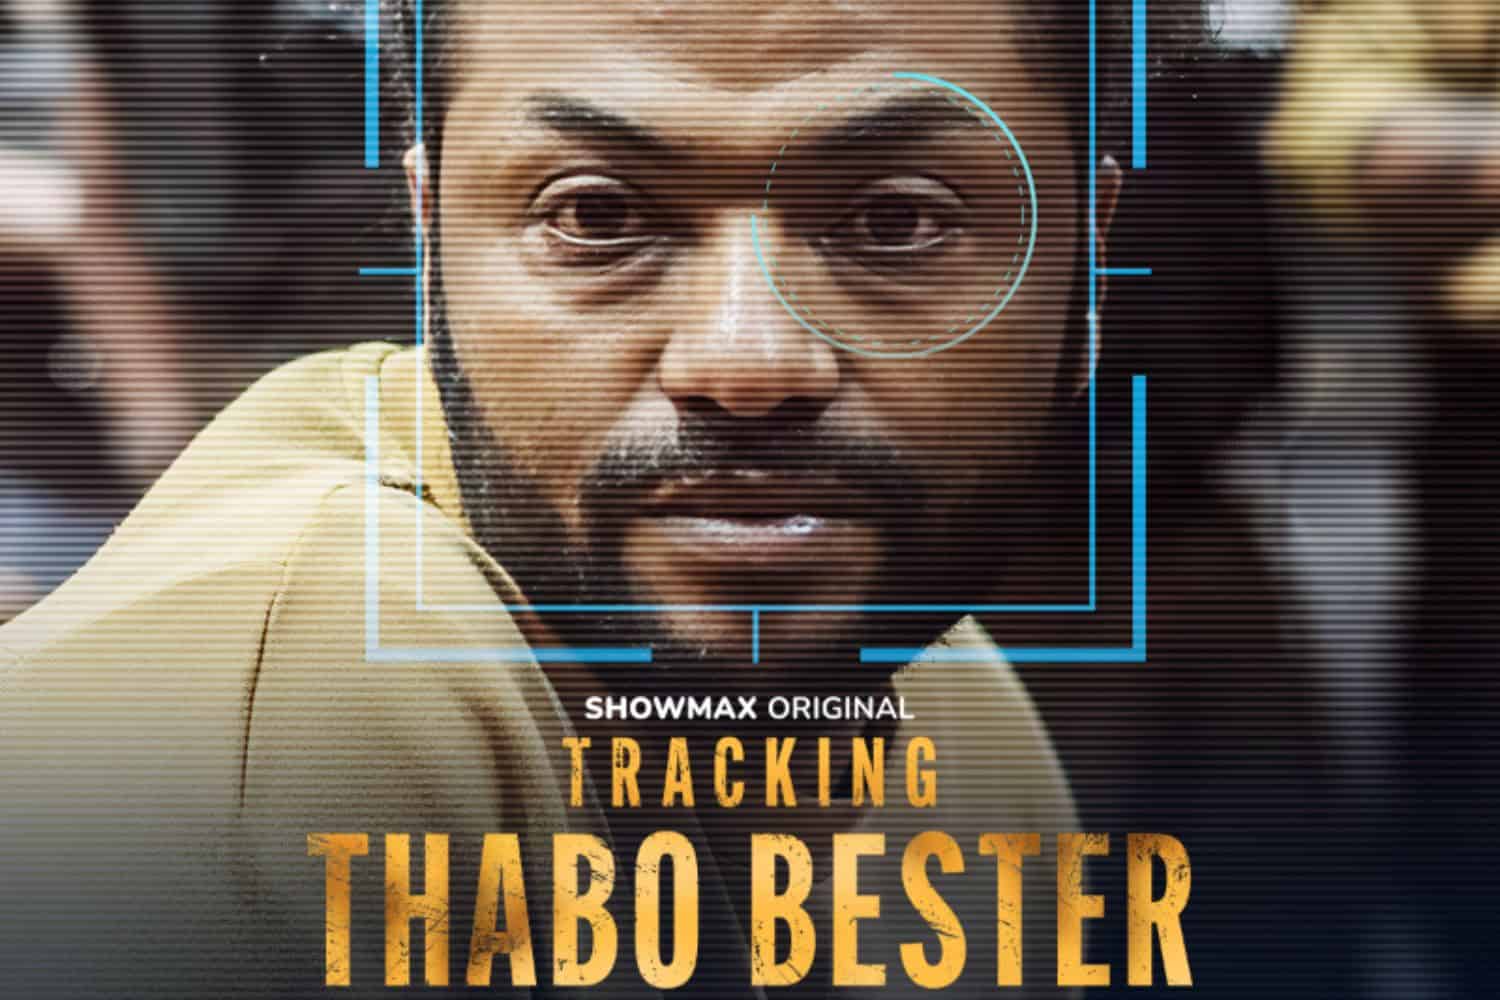 Tracking Thabo bester Showmax